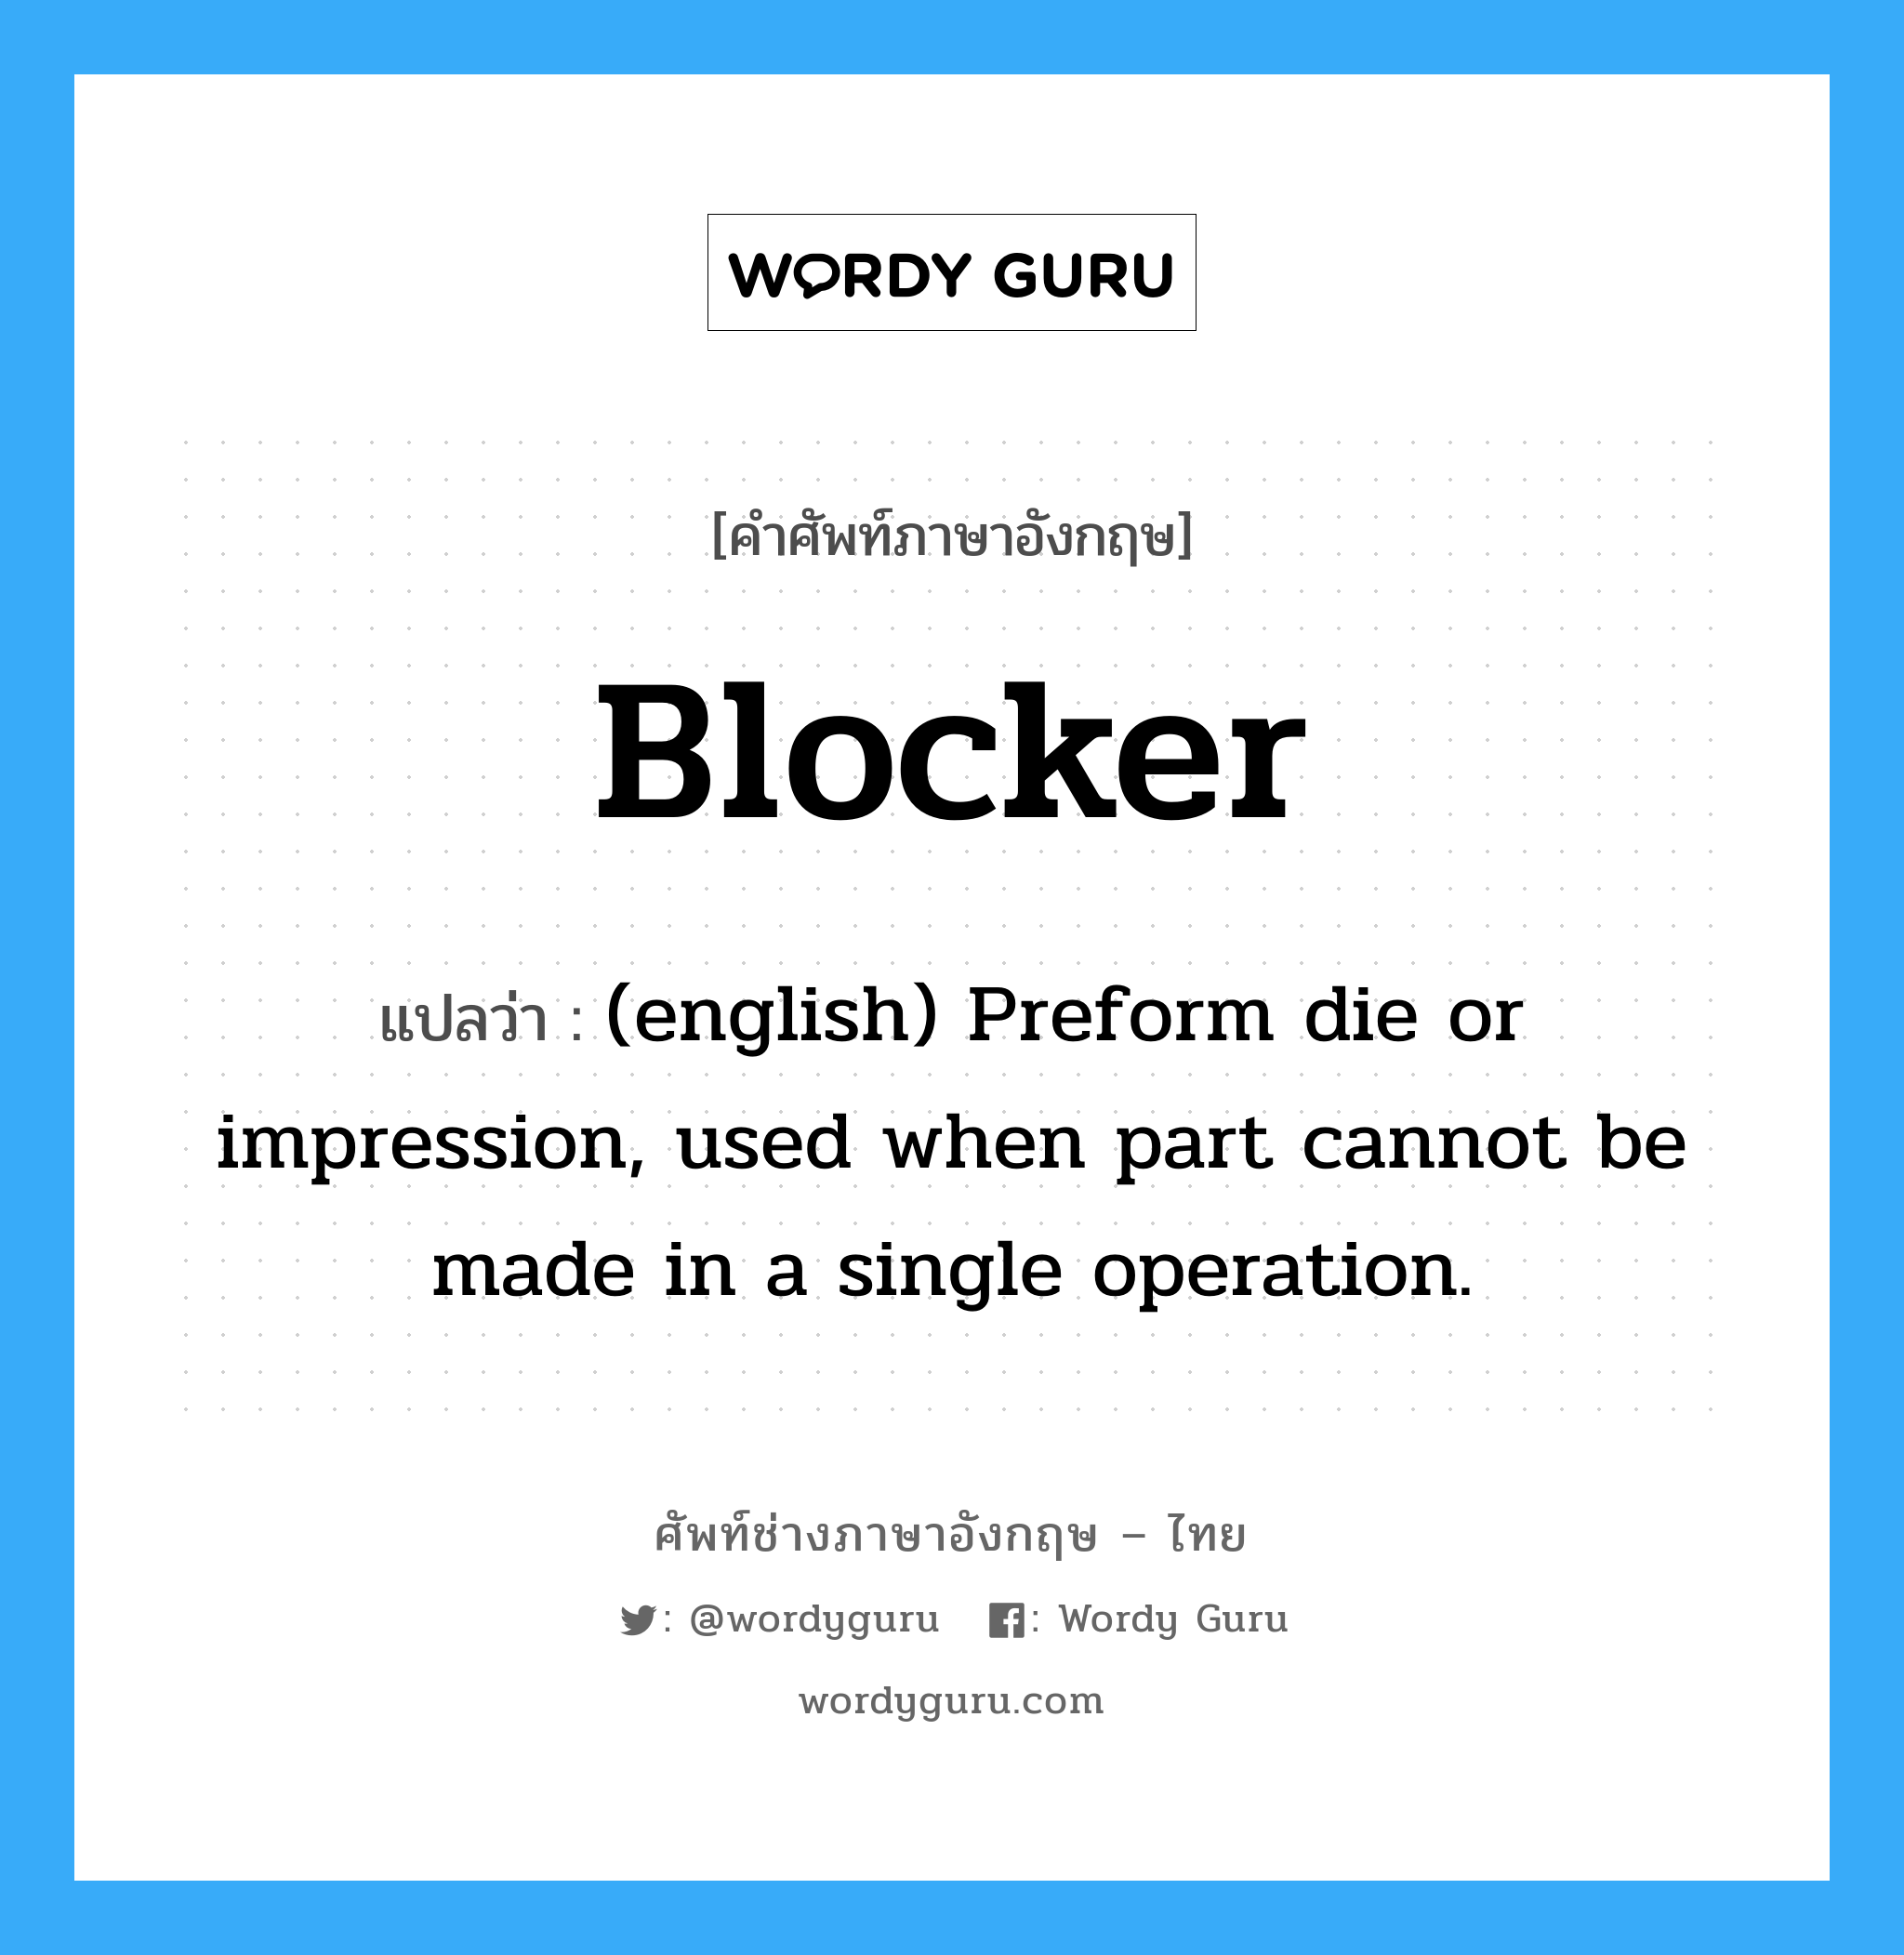 Blocker แปลว่า?, คำศัพท์ช่างภาษาอังกฤษ - ไทย Blocker คำศัพท์ภาษาอังกฤษ Blocker แปลว่า (english) Preform die or impression, used when part cannot be made in a single operation.